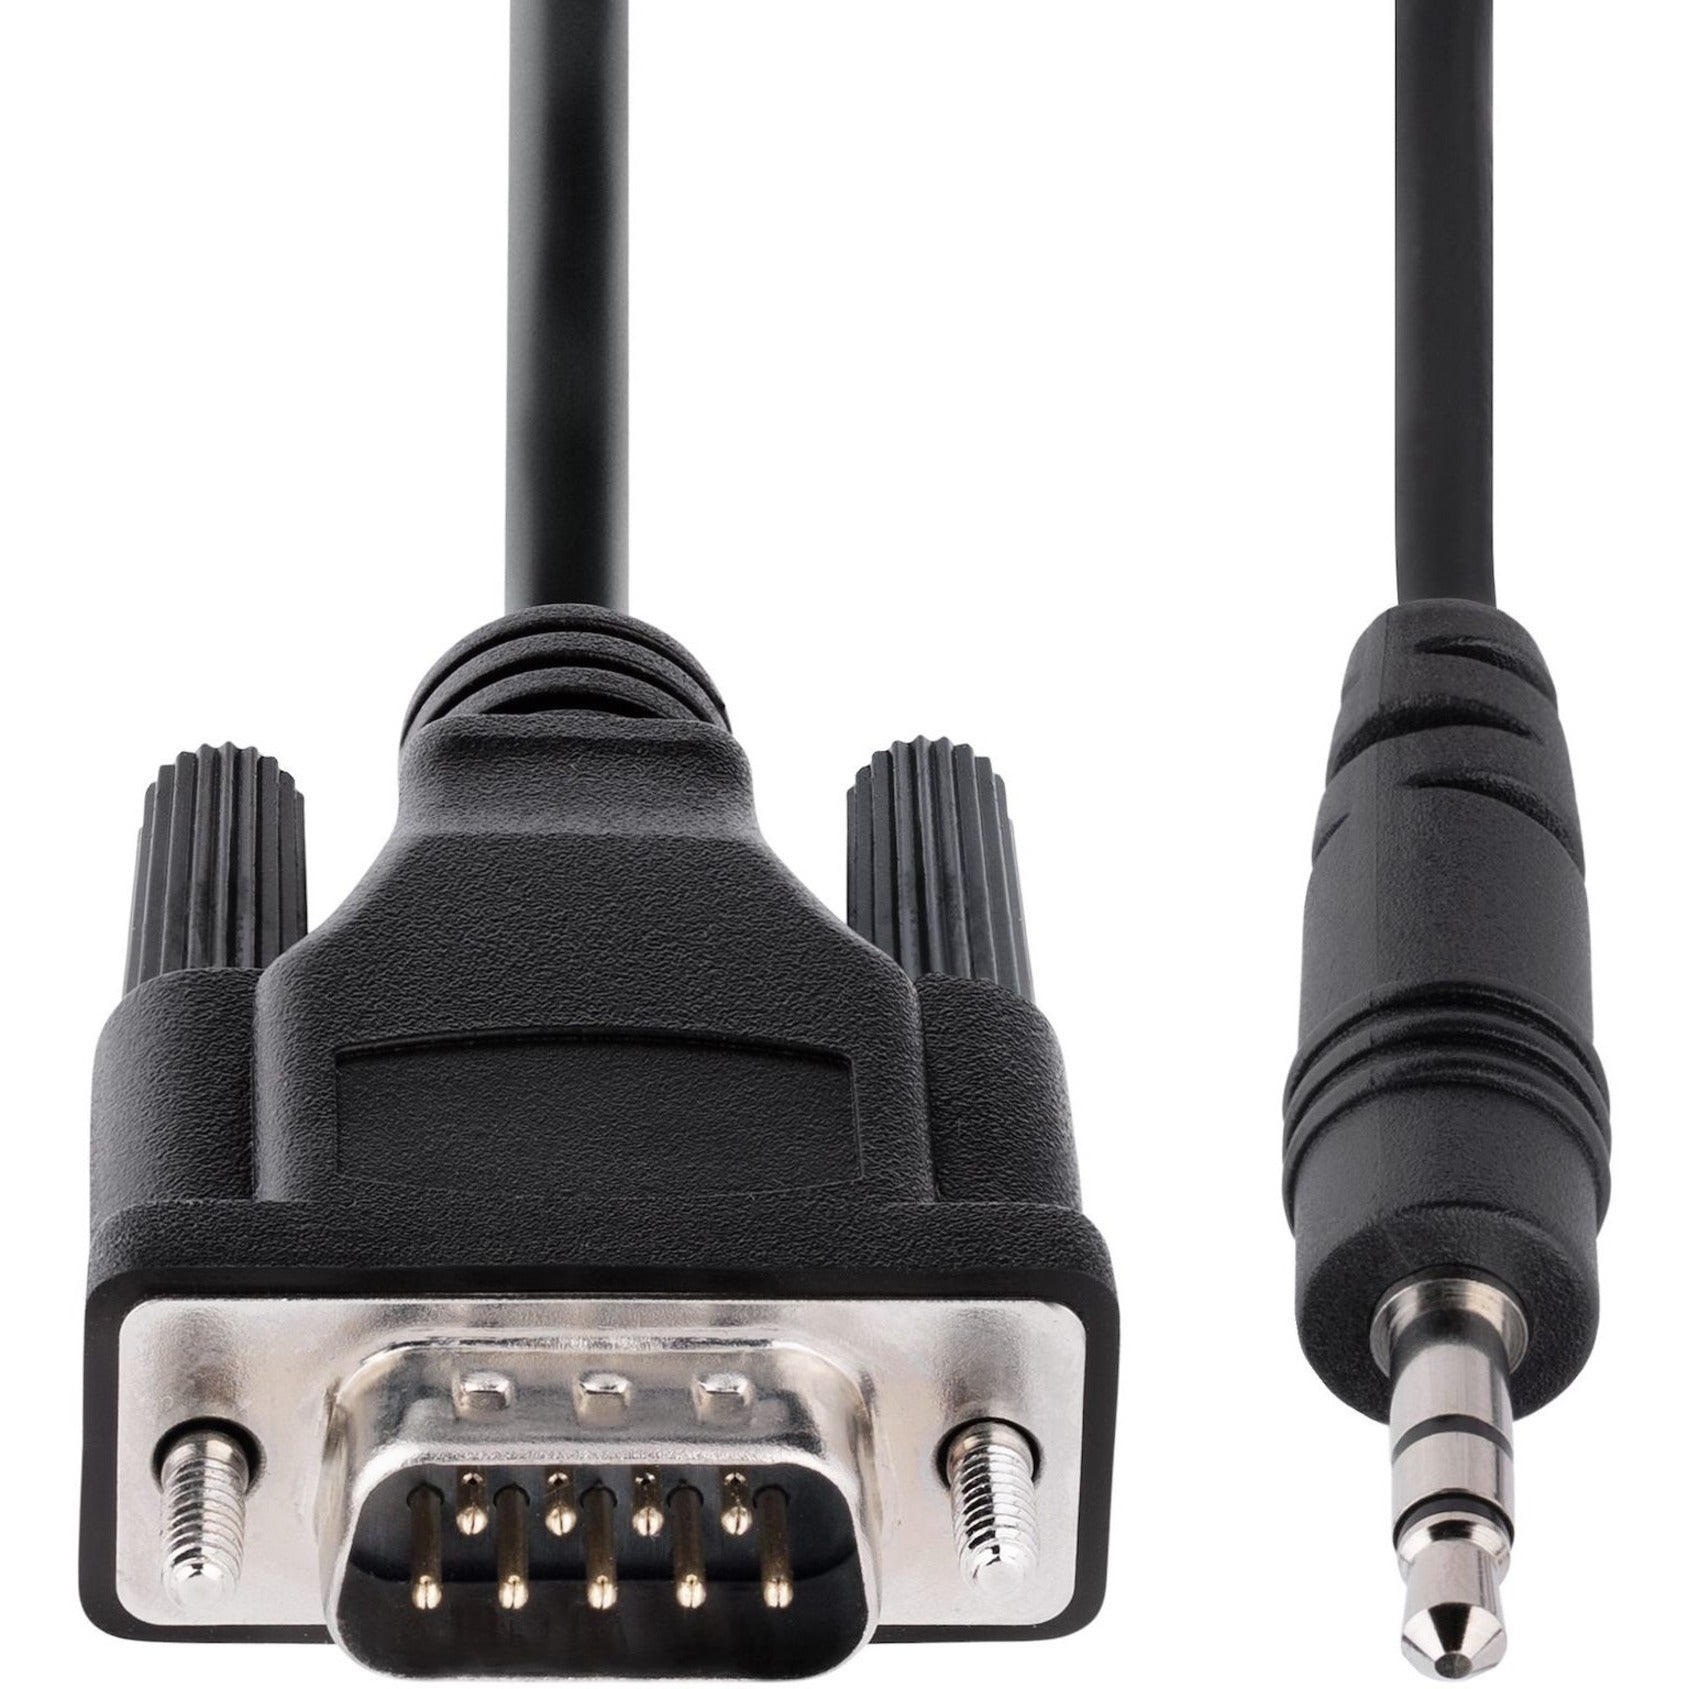 StarTech.com 9M351M-RS232-CABLE DB9 to 3.5mm RS232 Serial Cable, 3ft, for Serial Device Configuration